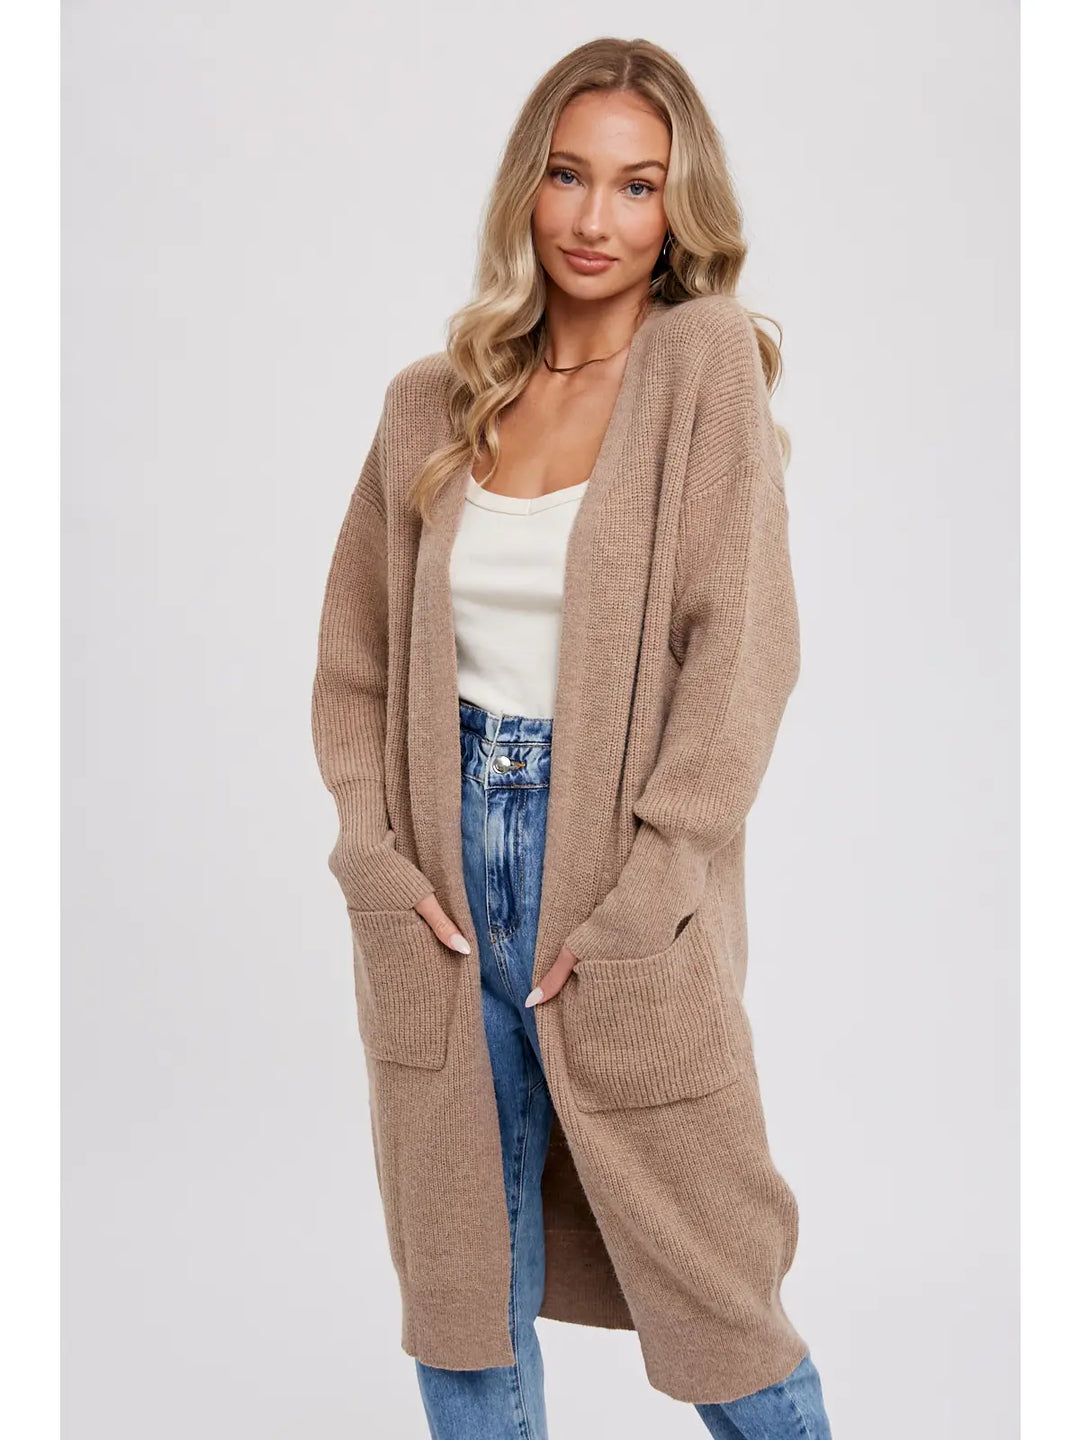 Ribbed Open Front Cardigan in Latte